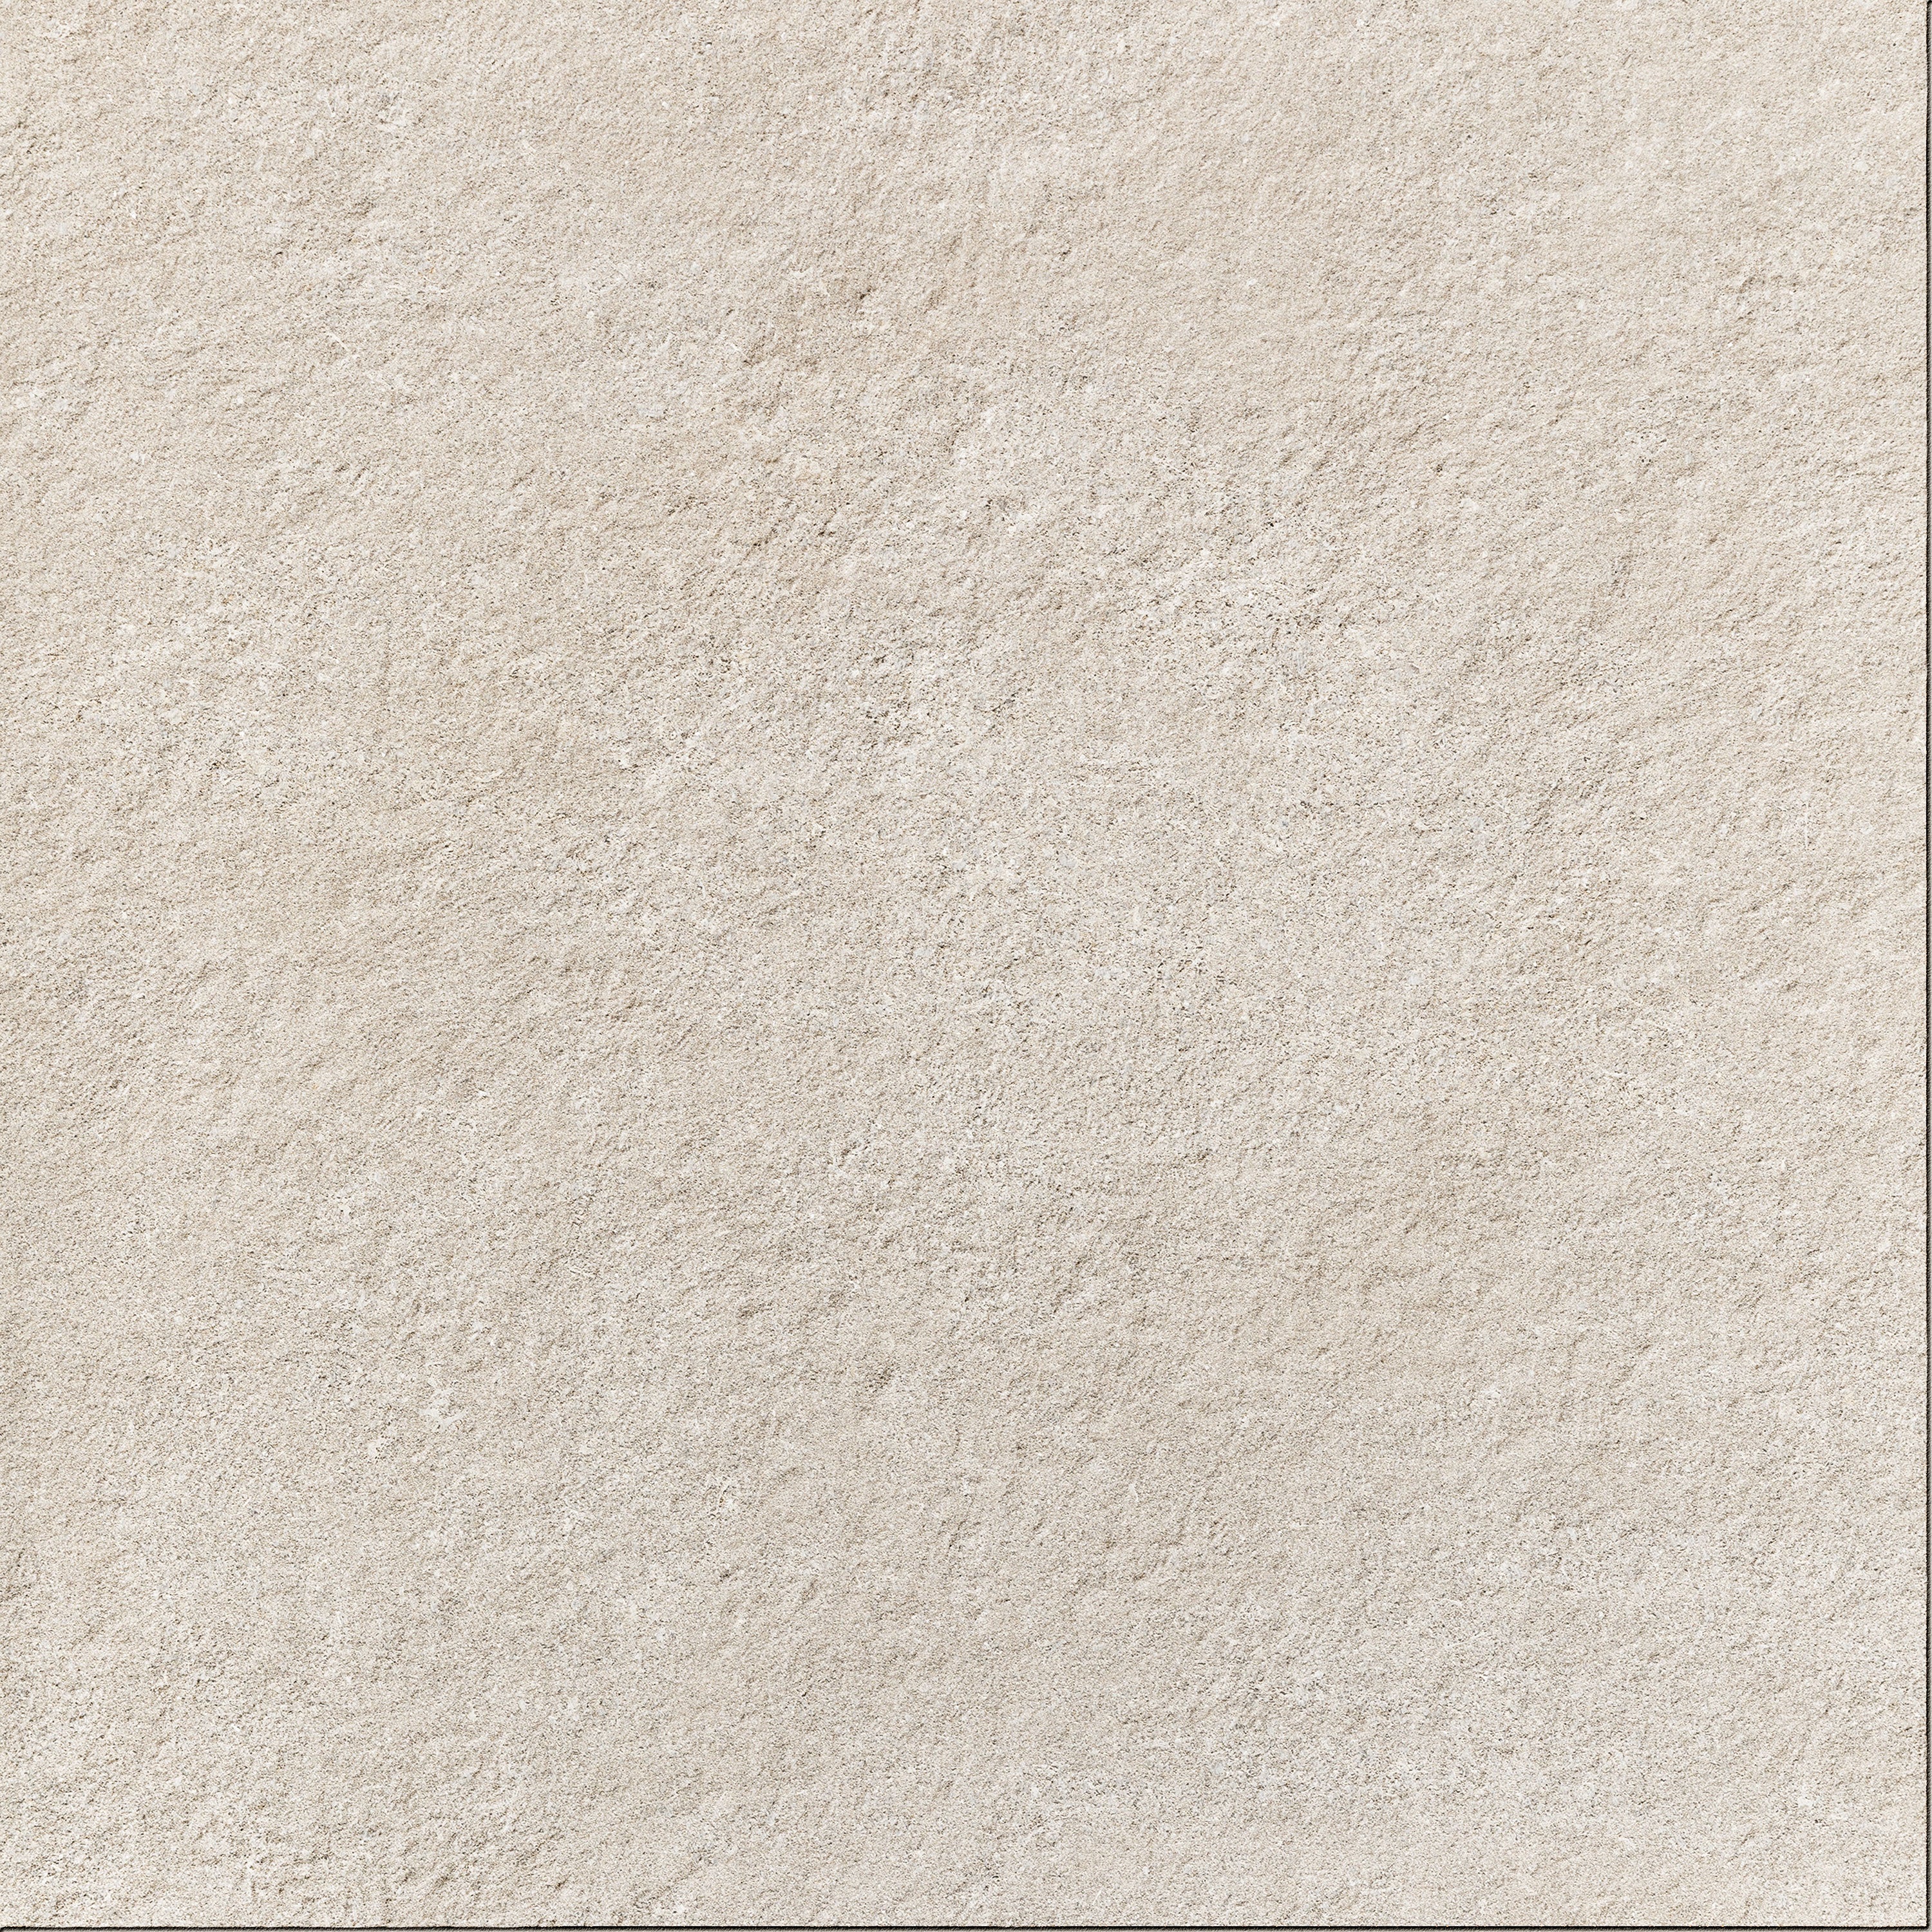 landmark frontier20 limestone indiana buff select paver tile 12x12x20mm matte rectified porcelain tile distributed by surface group international